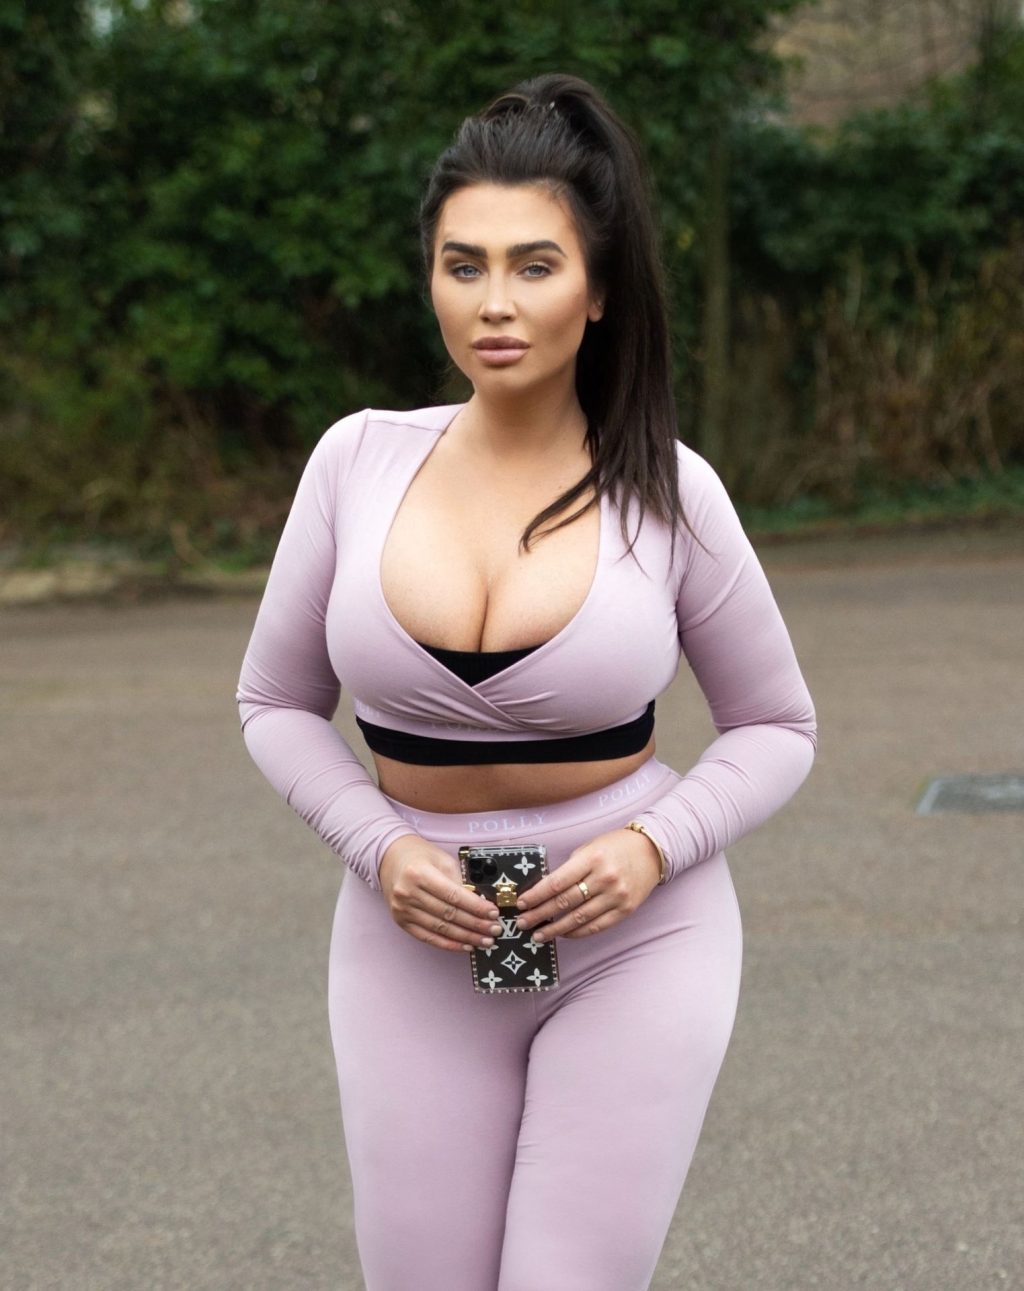 Lauren Goodger Is Seen Leaving Her House To Go Out For A Morning Run (20 Photos)